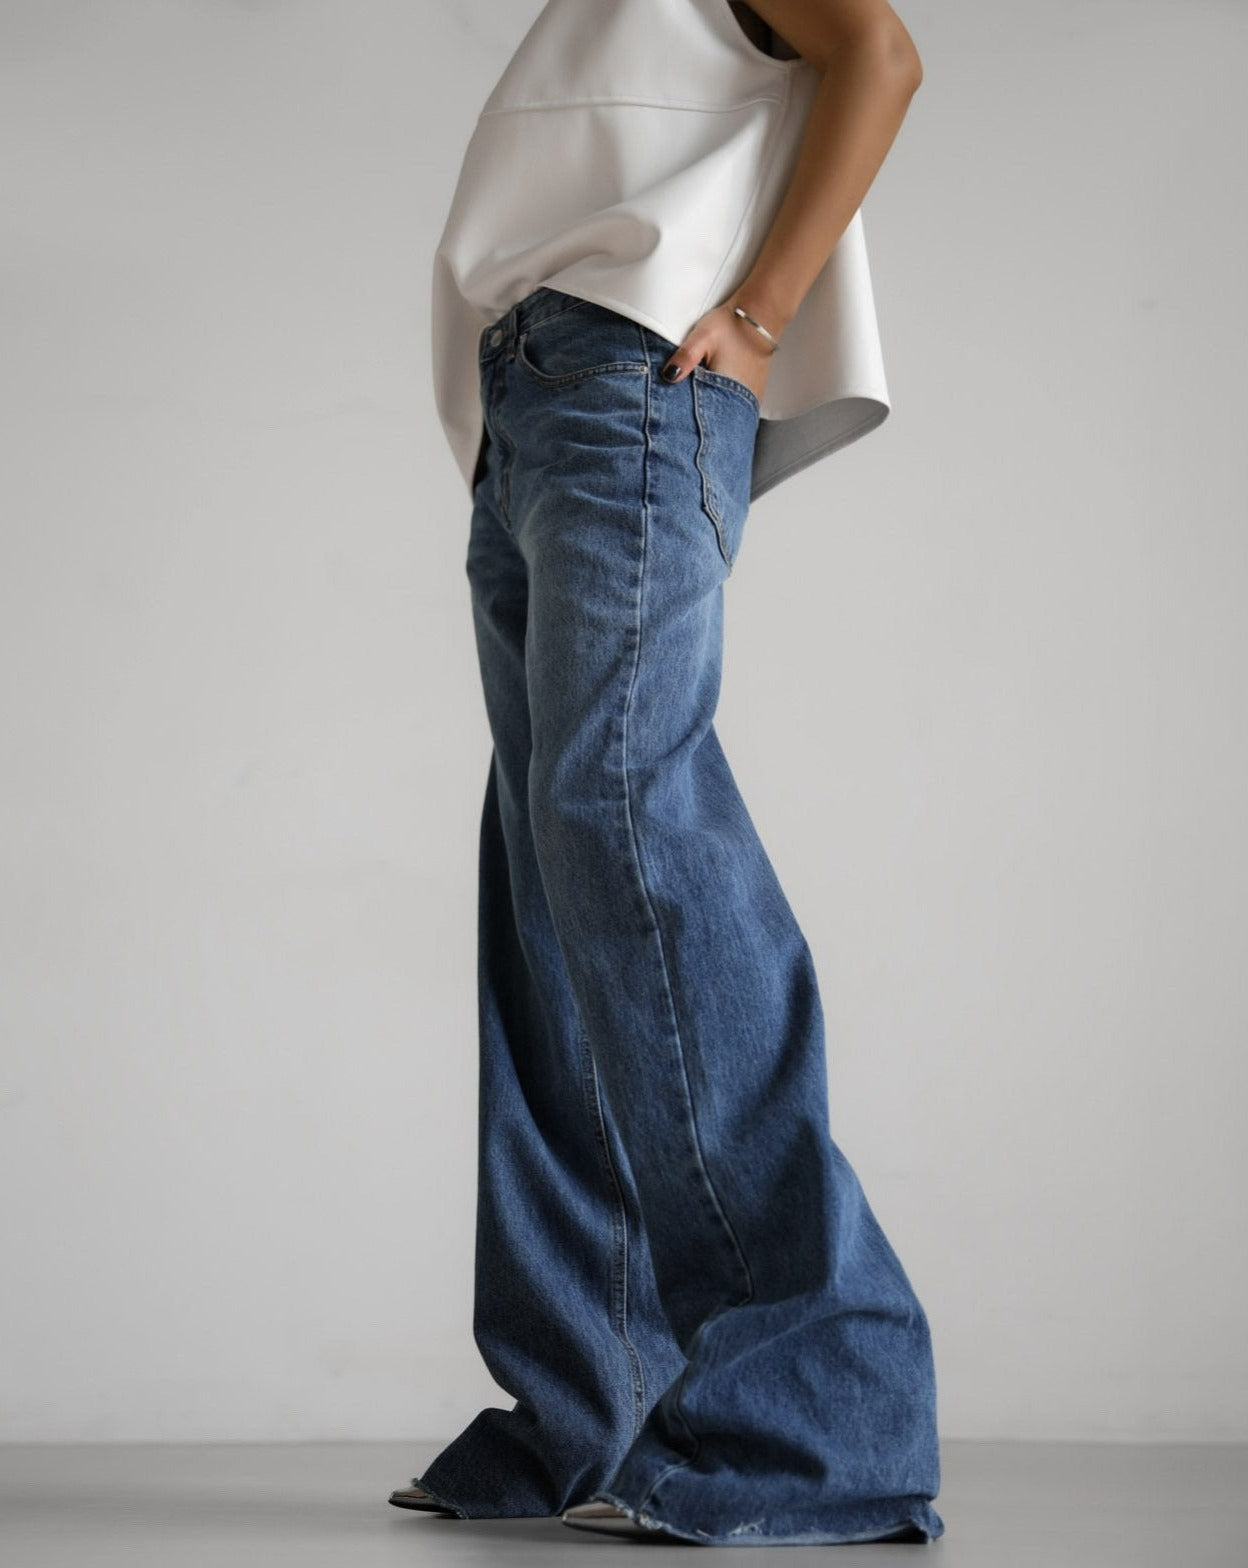 【PAPERMOON ペーパームーン】SS / Classic Raw - Cut Wide Fit Mid Blue Jeans